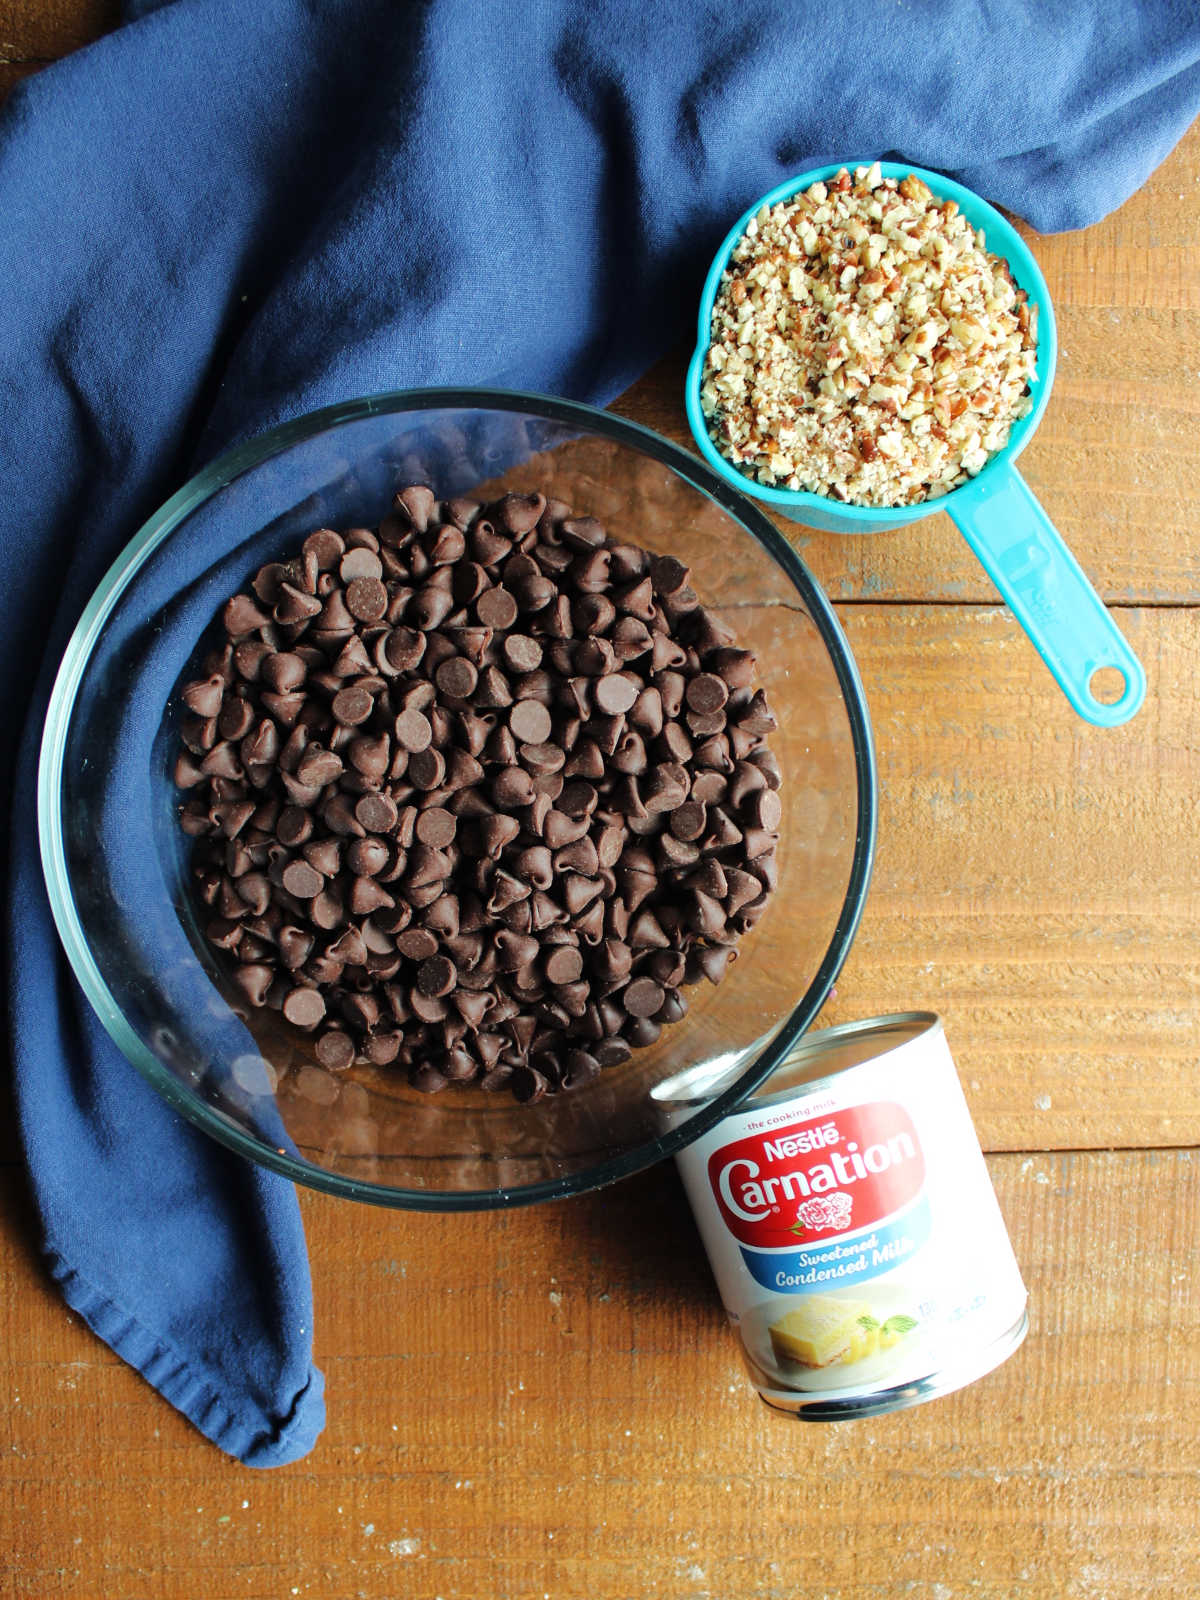 Ingredients including chocolate chips, condensed milk, and chopped pecans ready to be made into fudge ice cream cups.